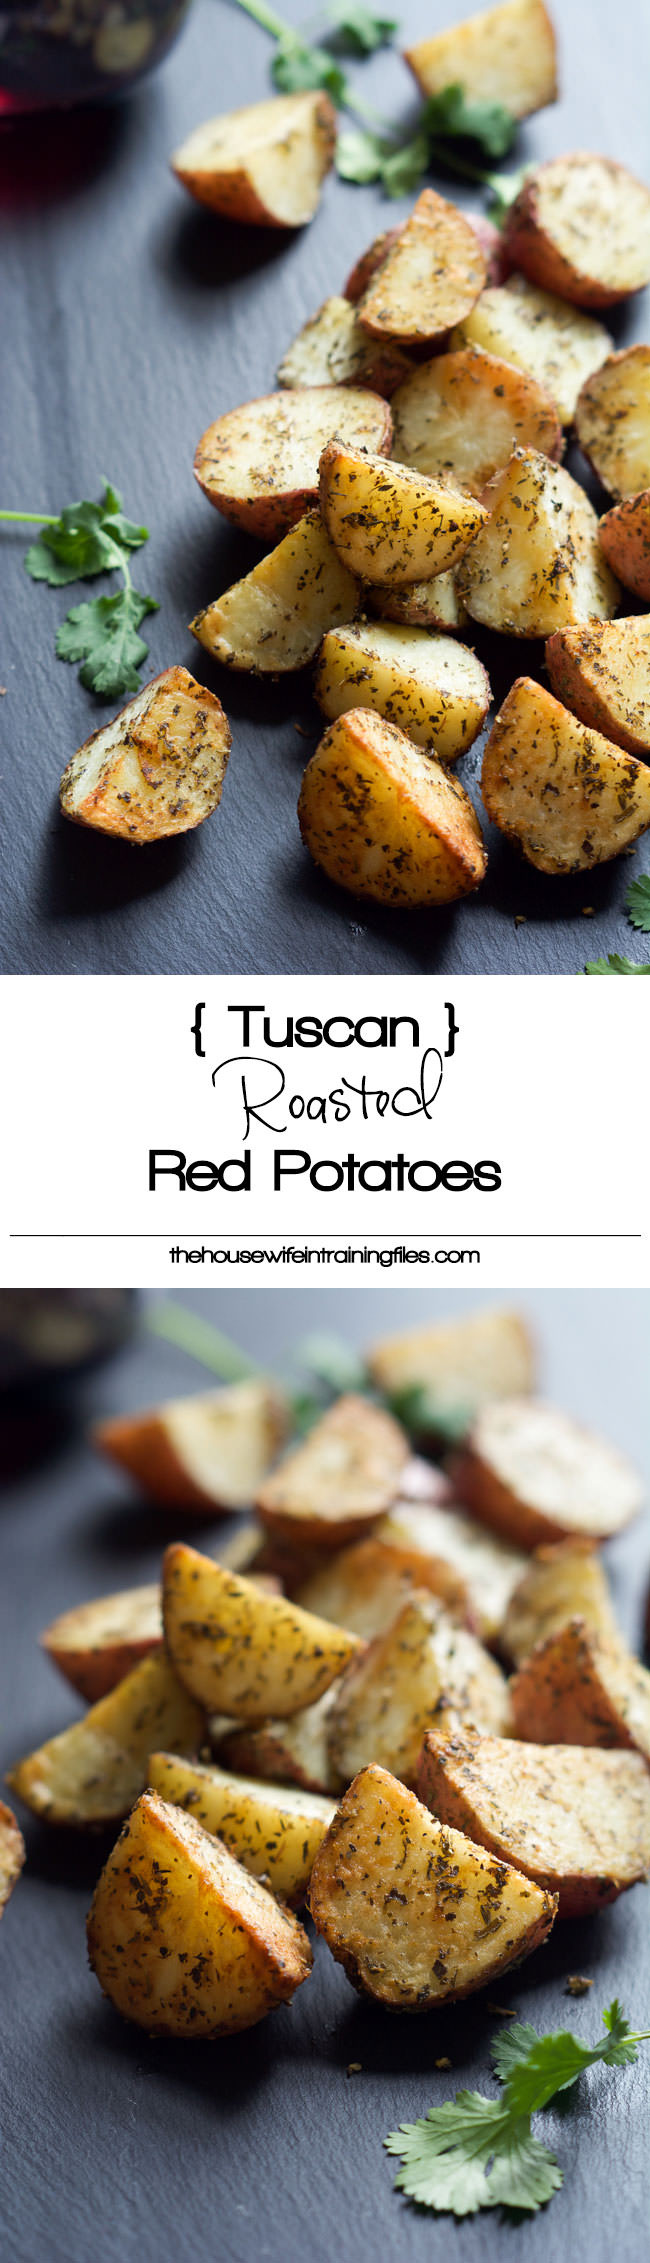 Healthy Roasted Potatoes
 Simple Tuscan Oven Roasted Red Potatoes